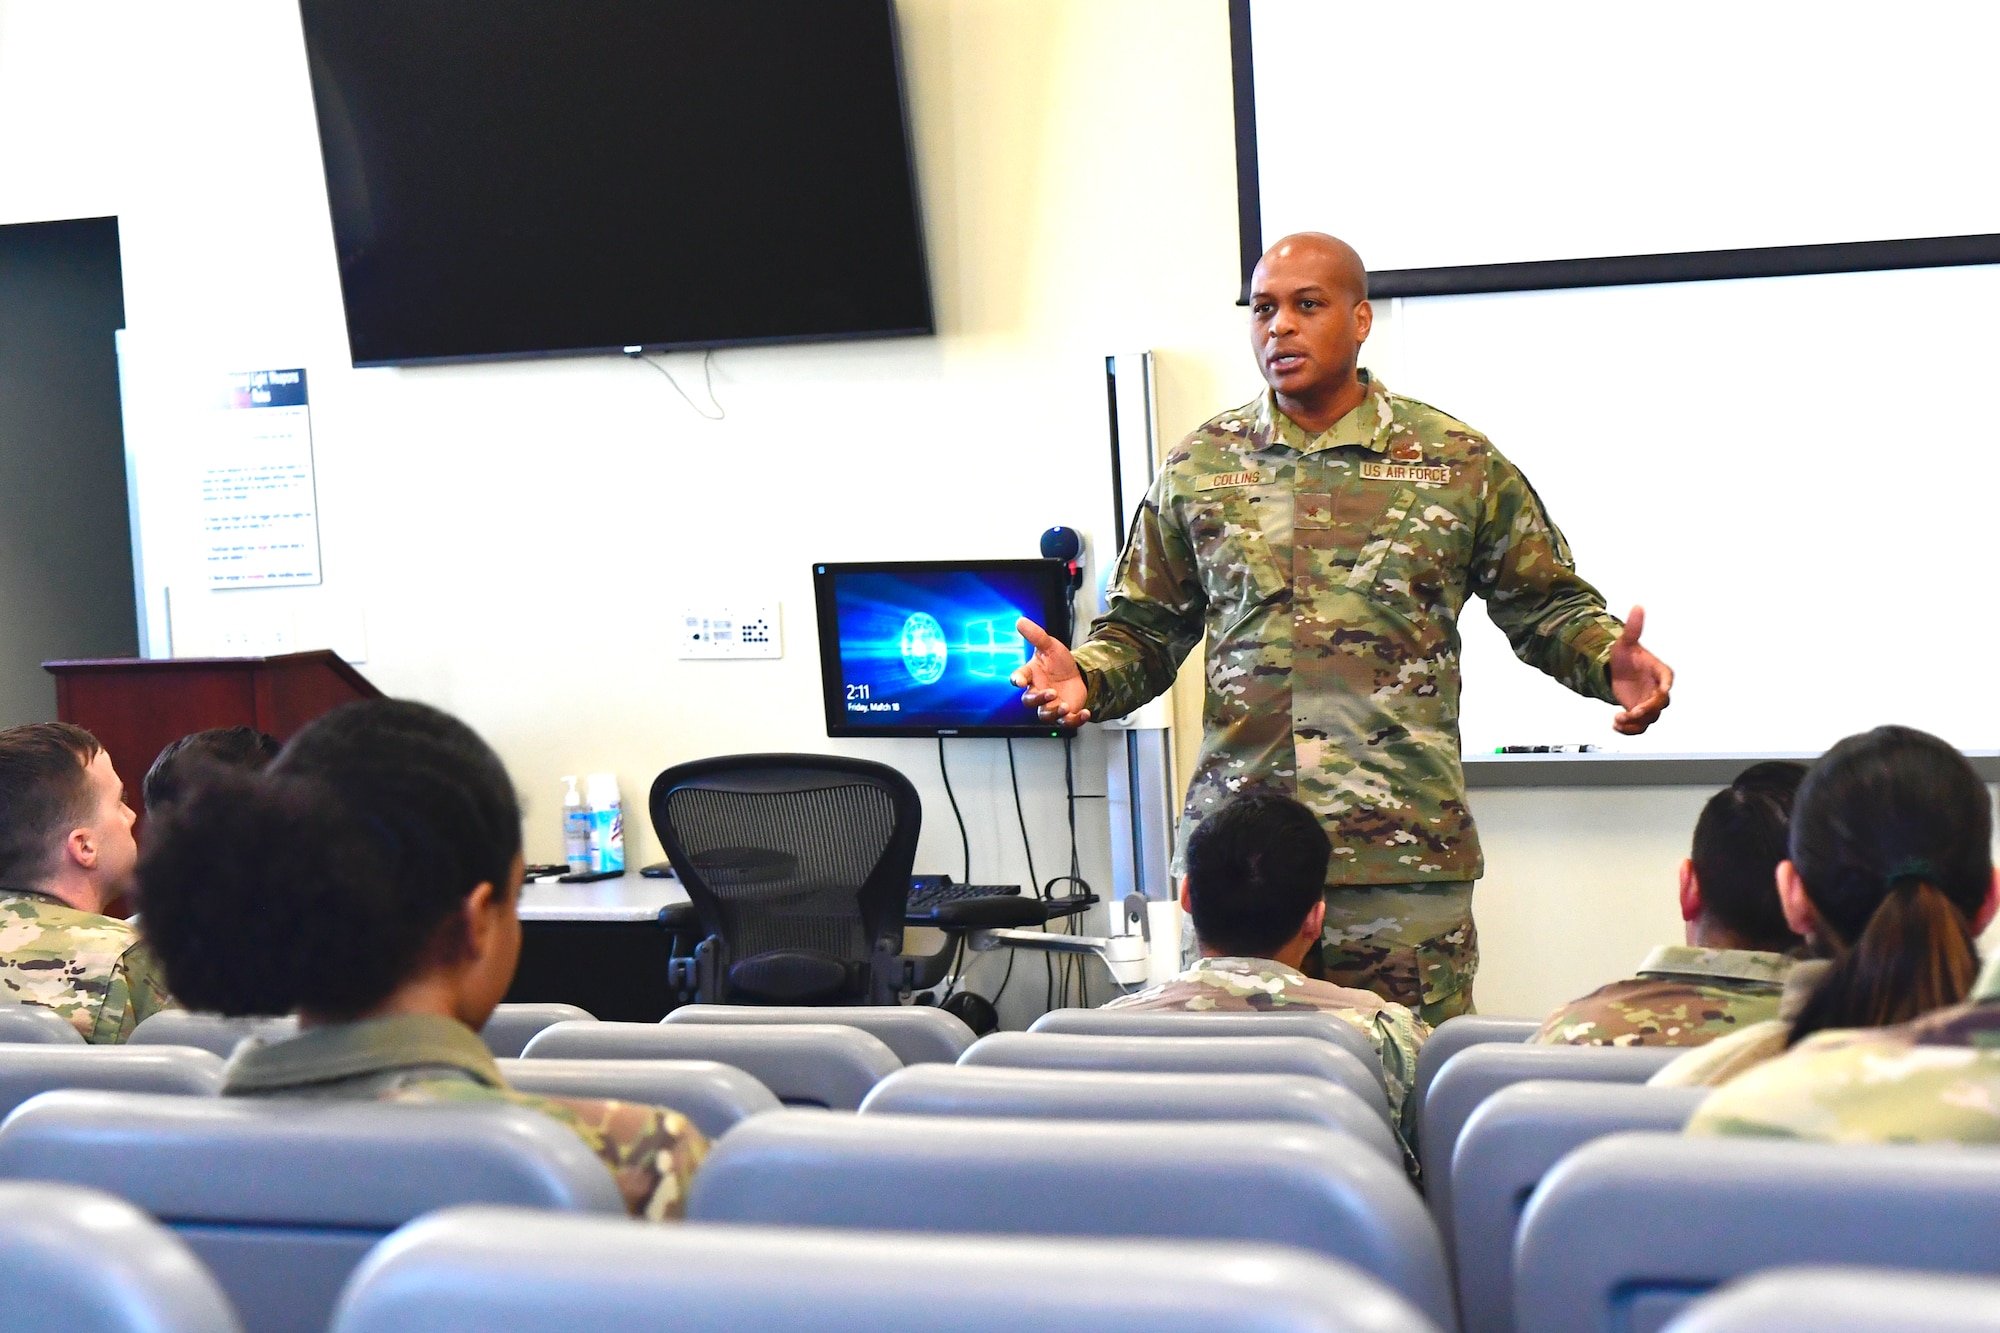 Brig. Gen. Roy Collins gestures with open arms to Defenders seated in a small auditorium.